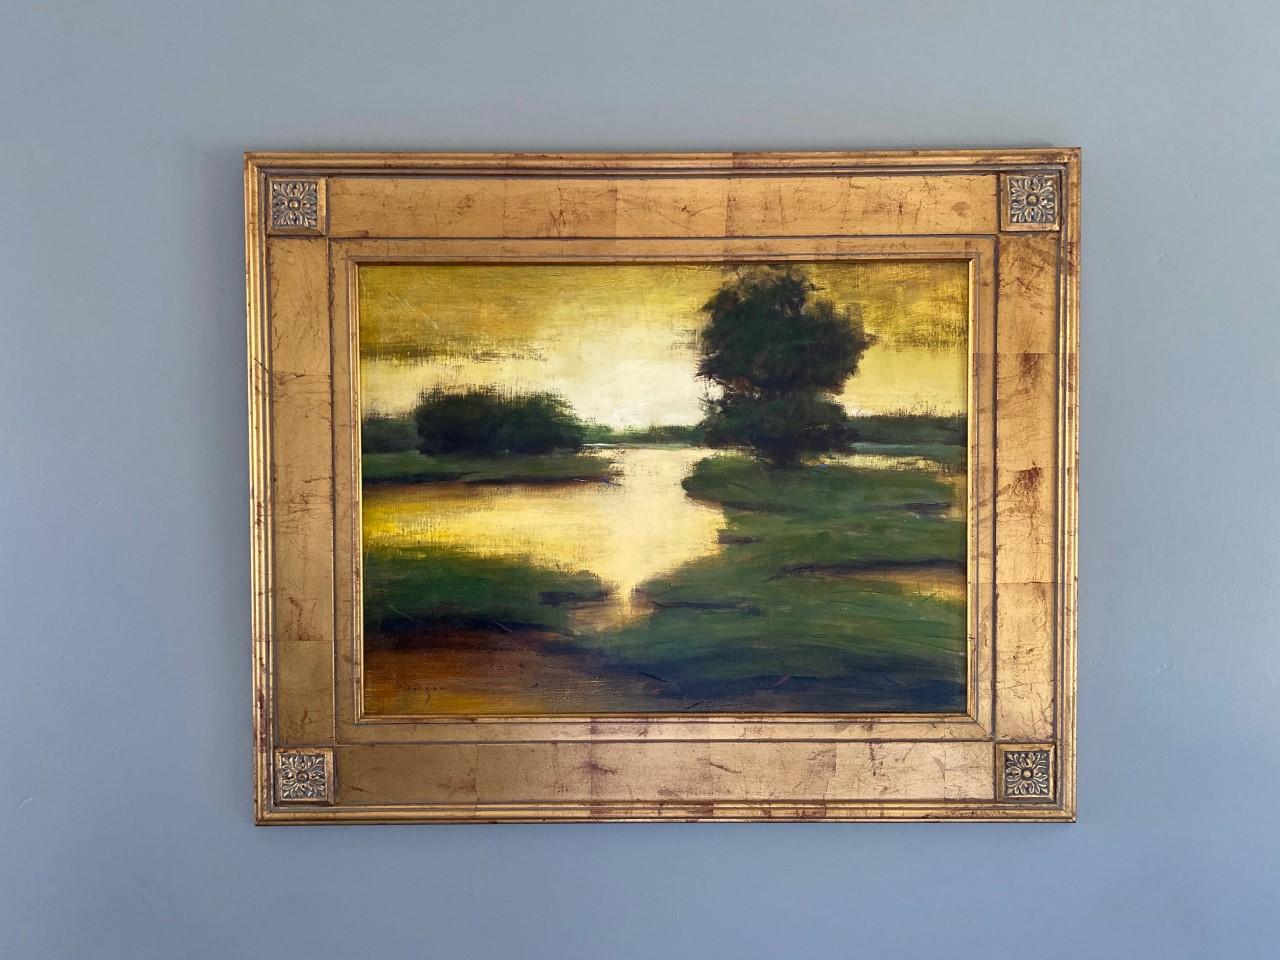 Beautiful original landscape scene by acclaimed artist Seth Winegar. This piece titled “Marshland Farmington” from 1999 showcases the light in nature from the perspective of the artist. Light in the horizon illuminating with shades of gold around a